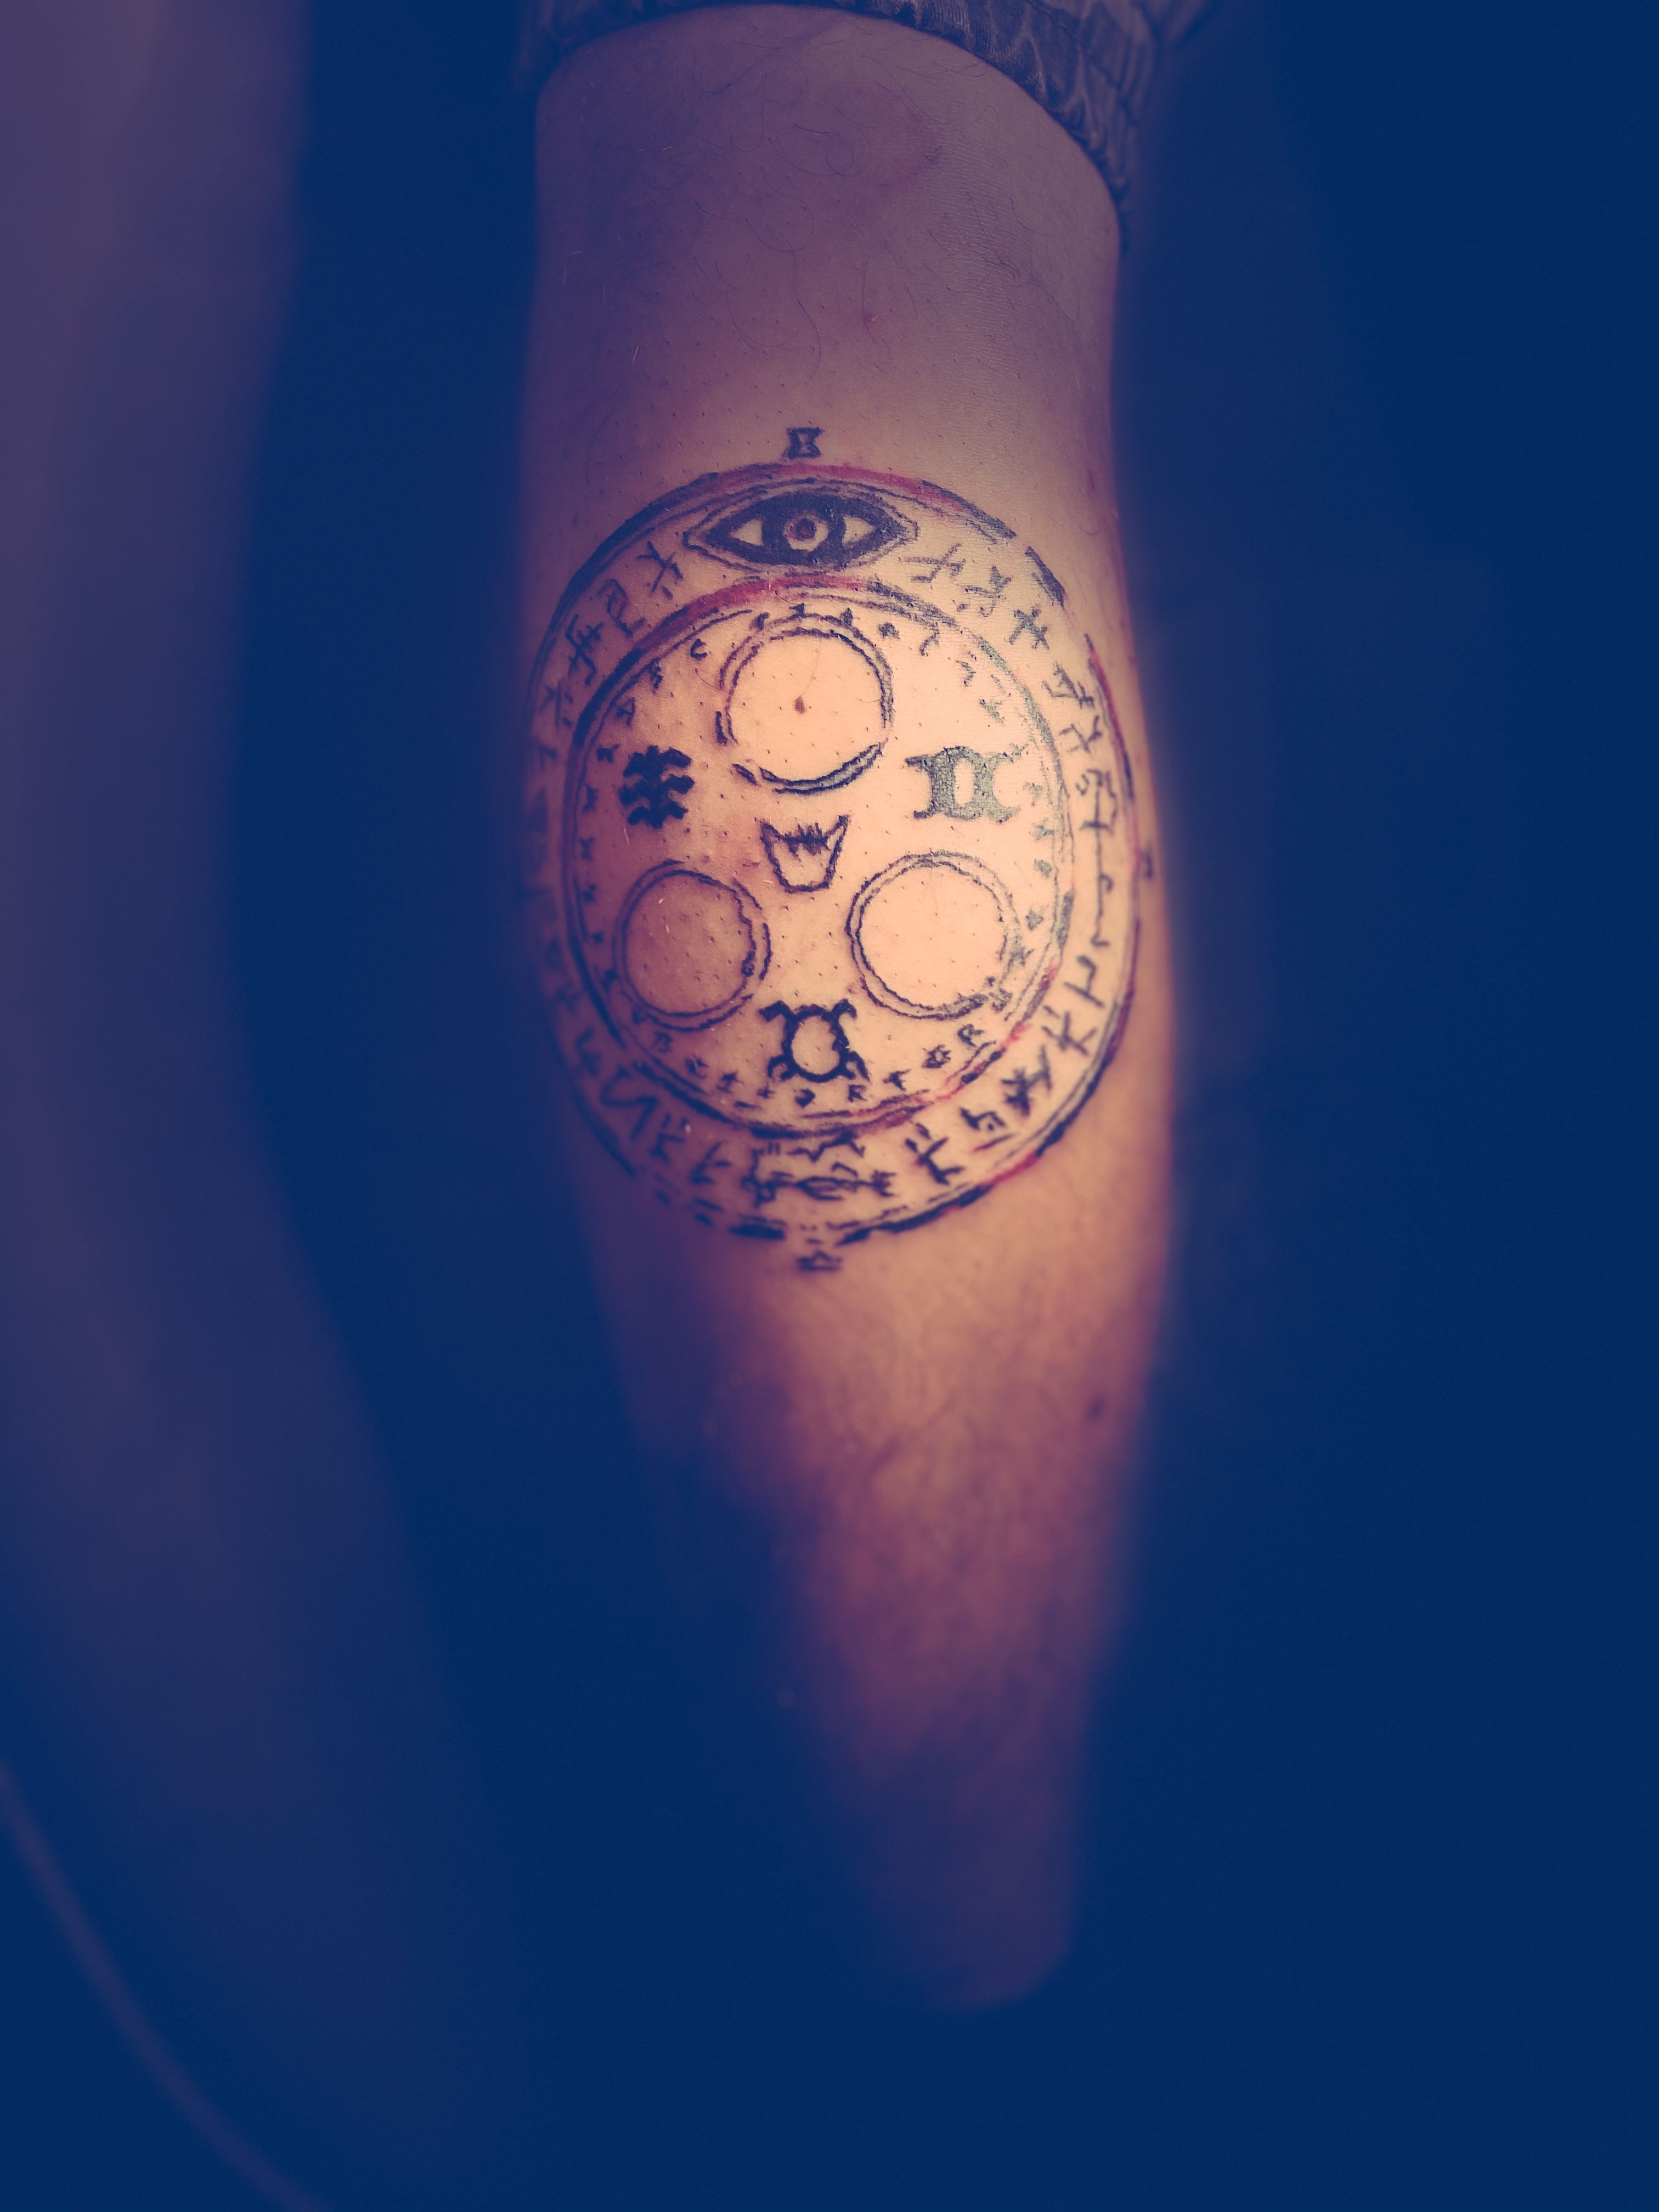 Update 67 circle of fifths tattoo latest  incdgdbentre